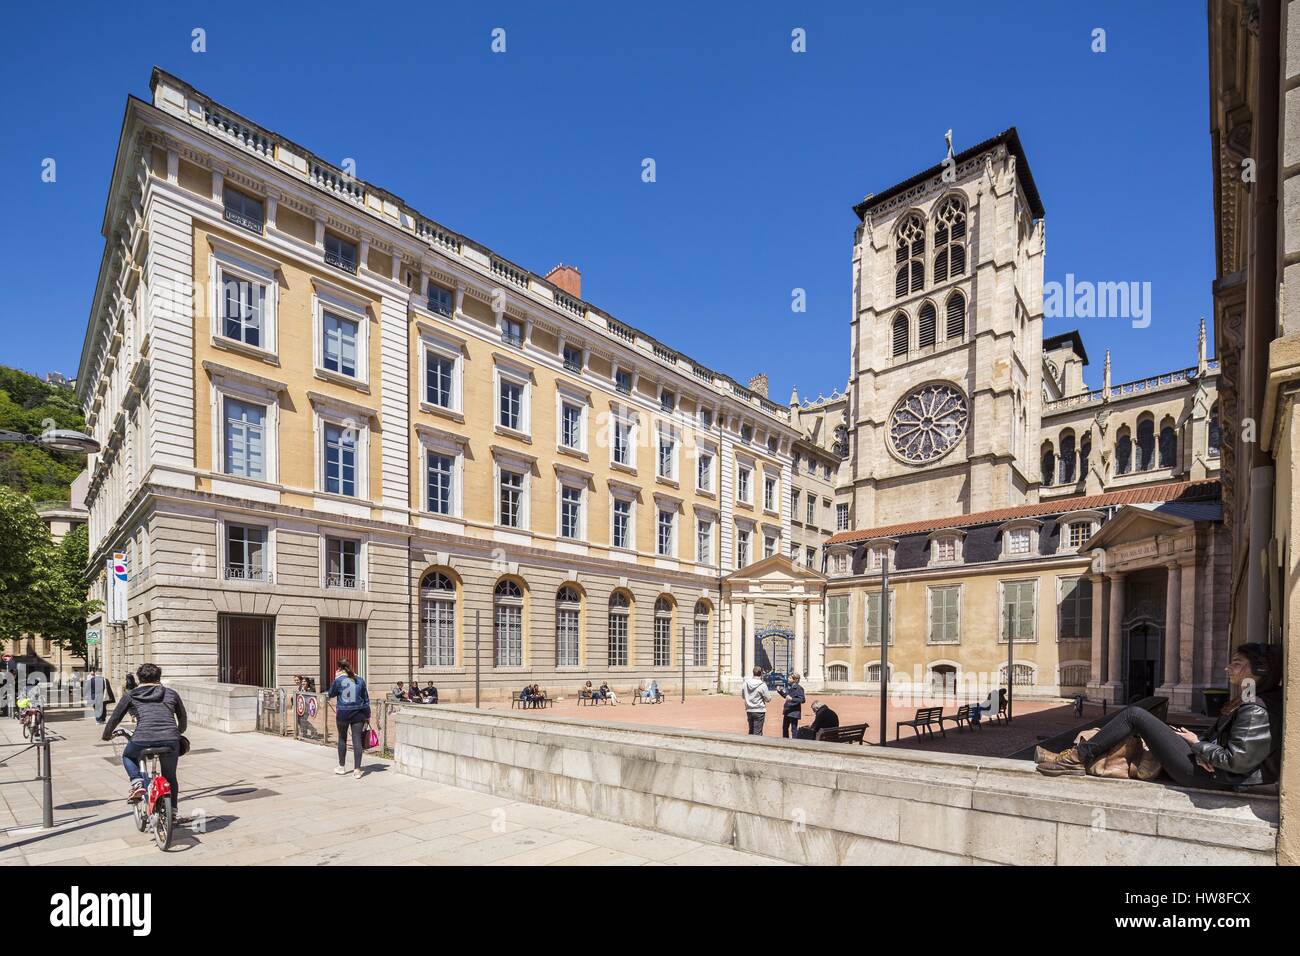 France, Rhone, Lyon, historical site listed as World Heritage by UNESCO, Vieux Lyon (Old Town), the southwest tower of St Jean cathedral and St Jean Palace courtyard which houses the library Stock Photo